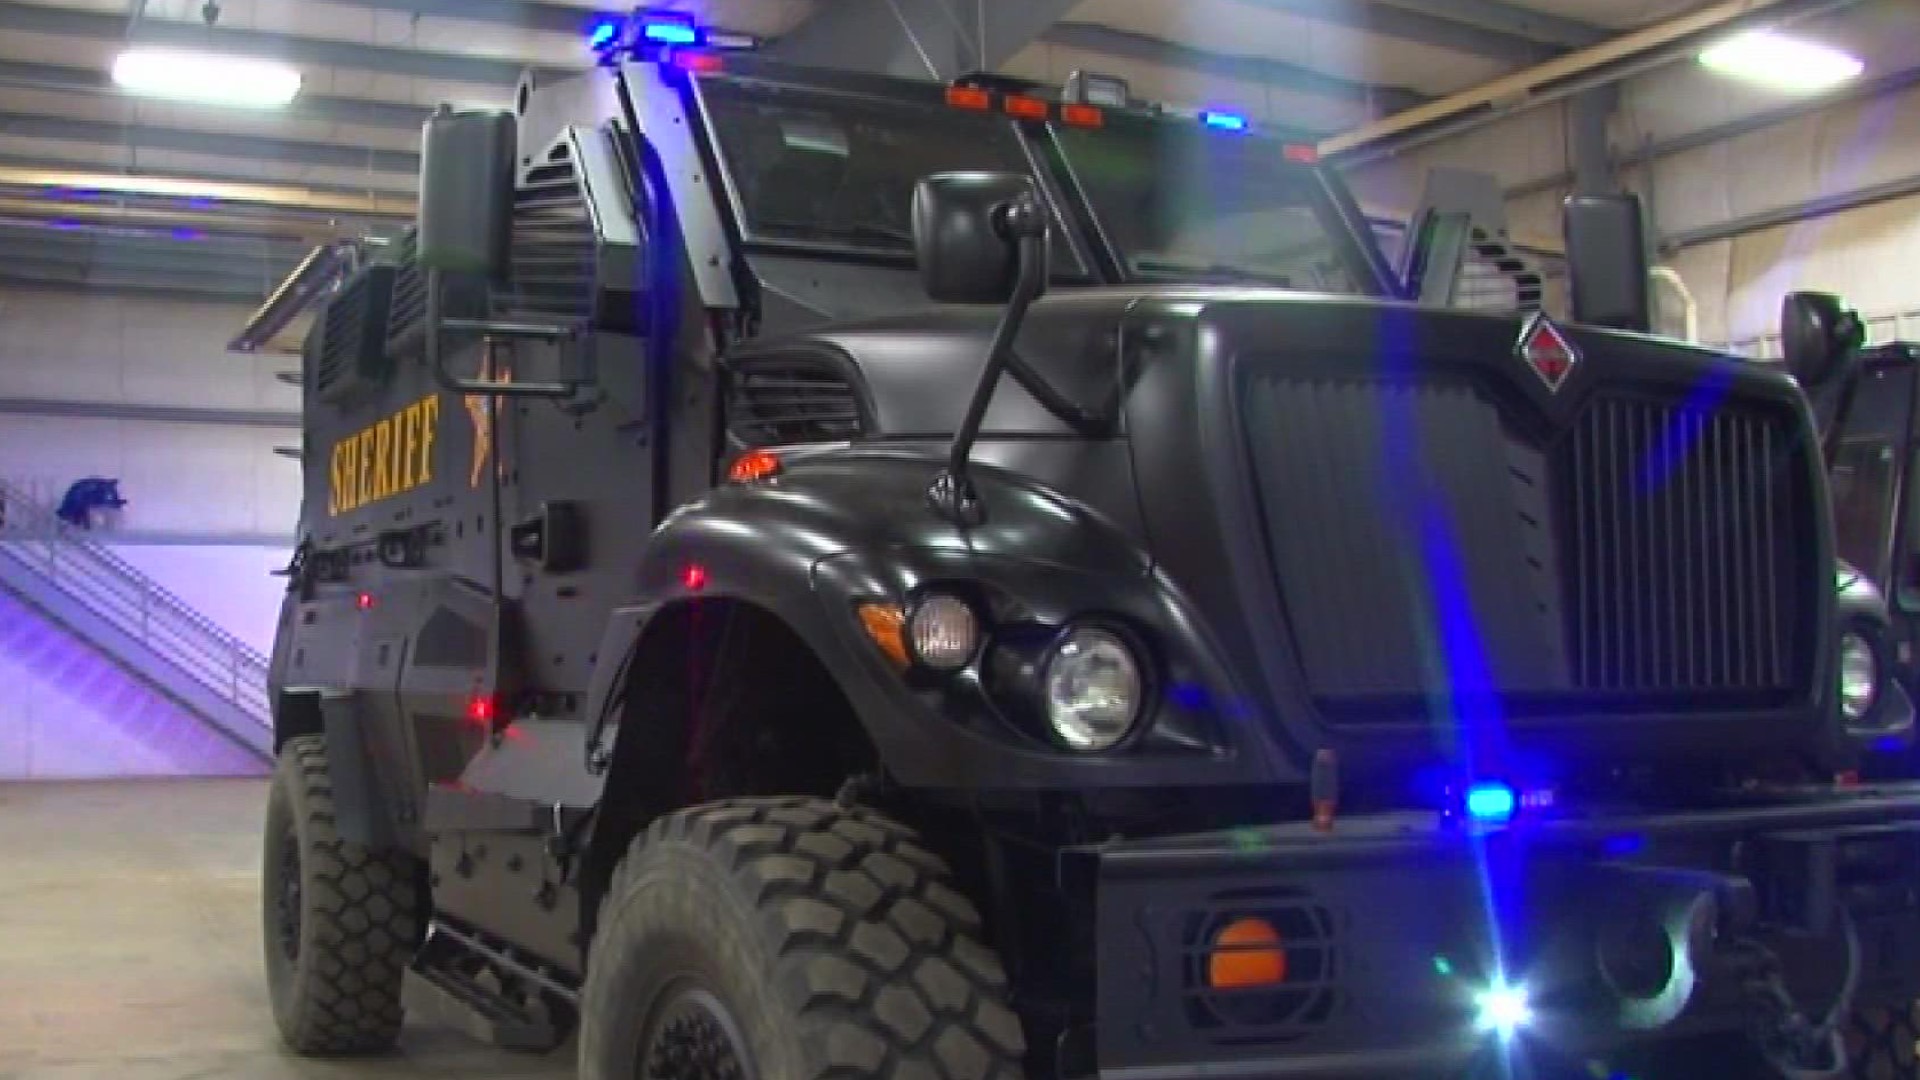 The MRAP is used in combat zones by military personnel. The Toledo Police Department wants to use it to render care during mass shootings and standoff situations.